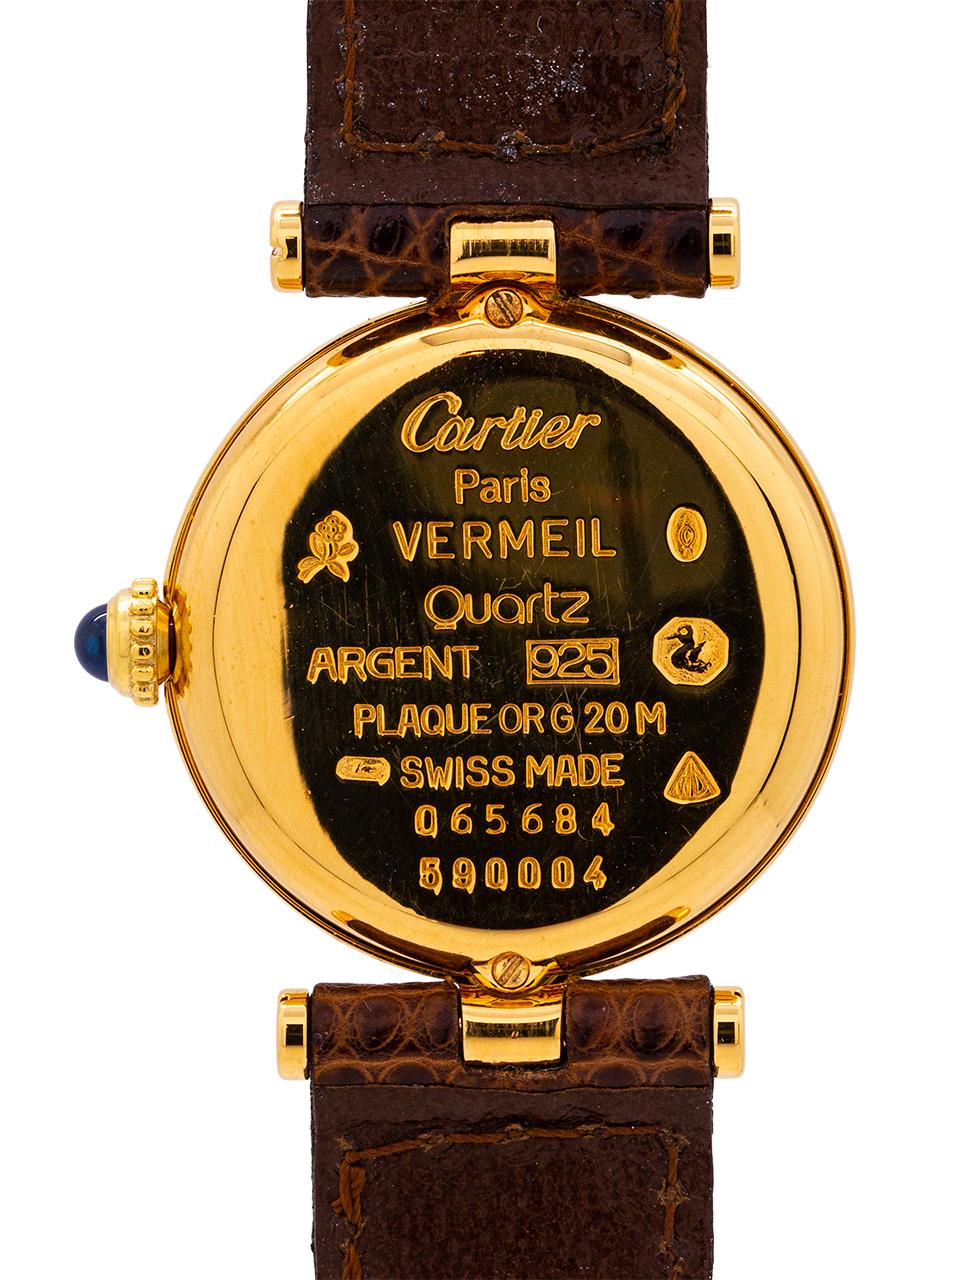 Cartier Women’s Vendome Tank Vermeil Watch, circa 1990s In Excellent Condition For Sale In West Hollywood, CA